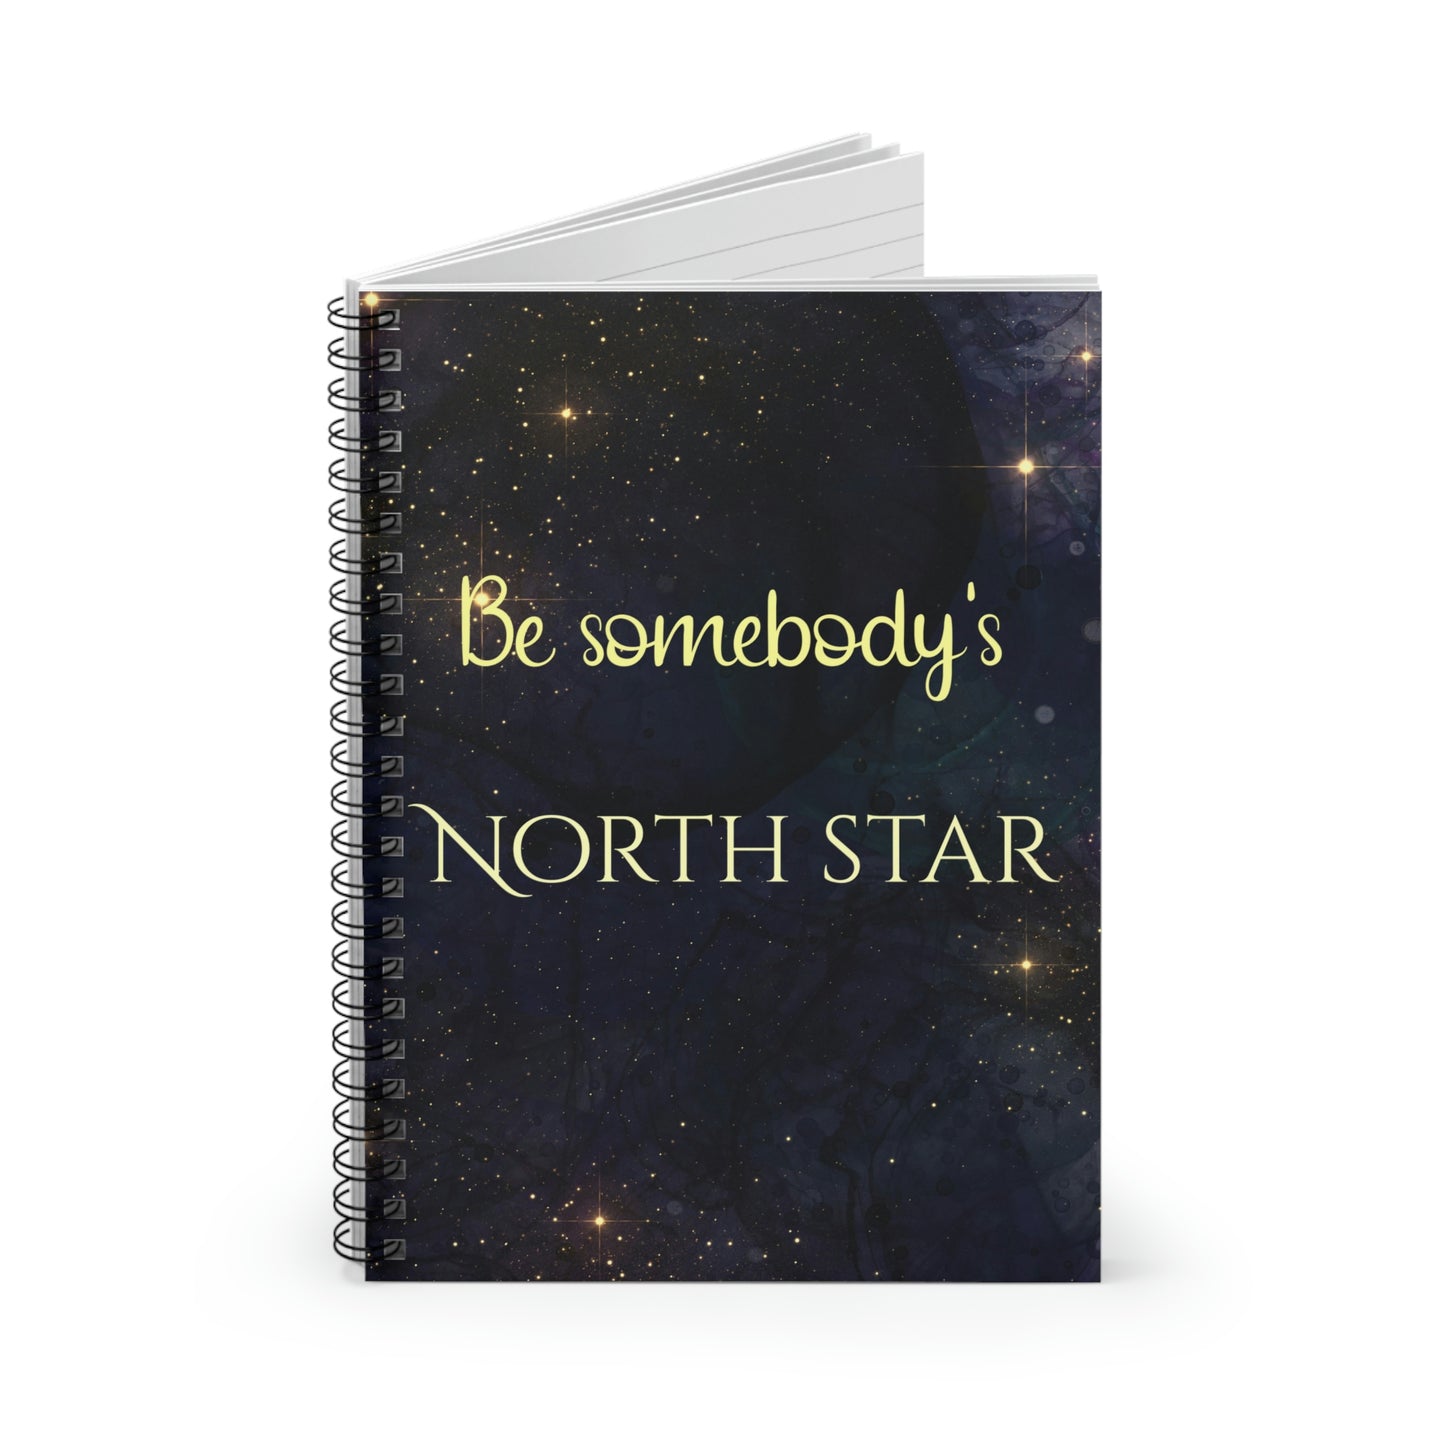 Be somebody's north star Spiral Notebook